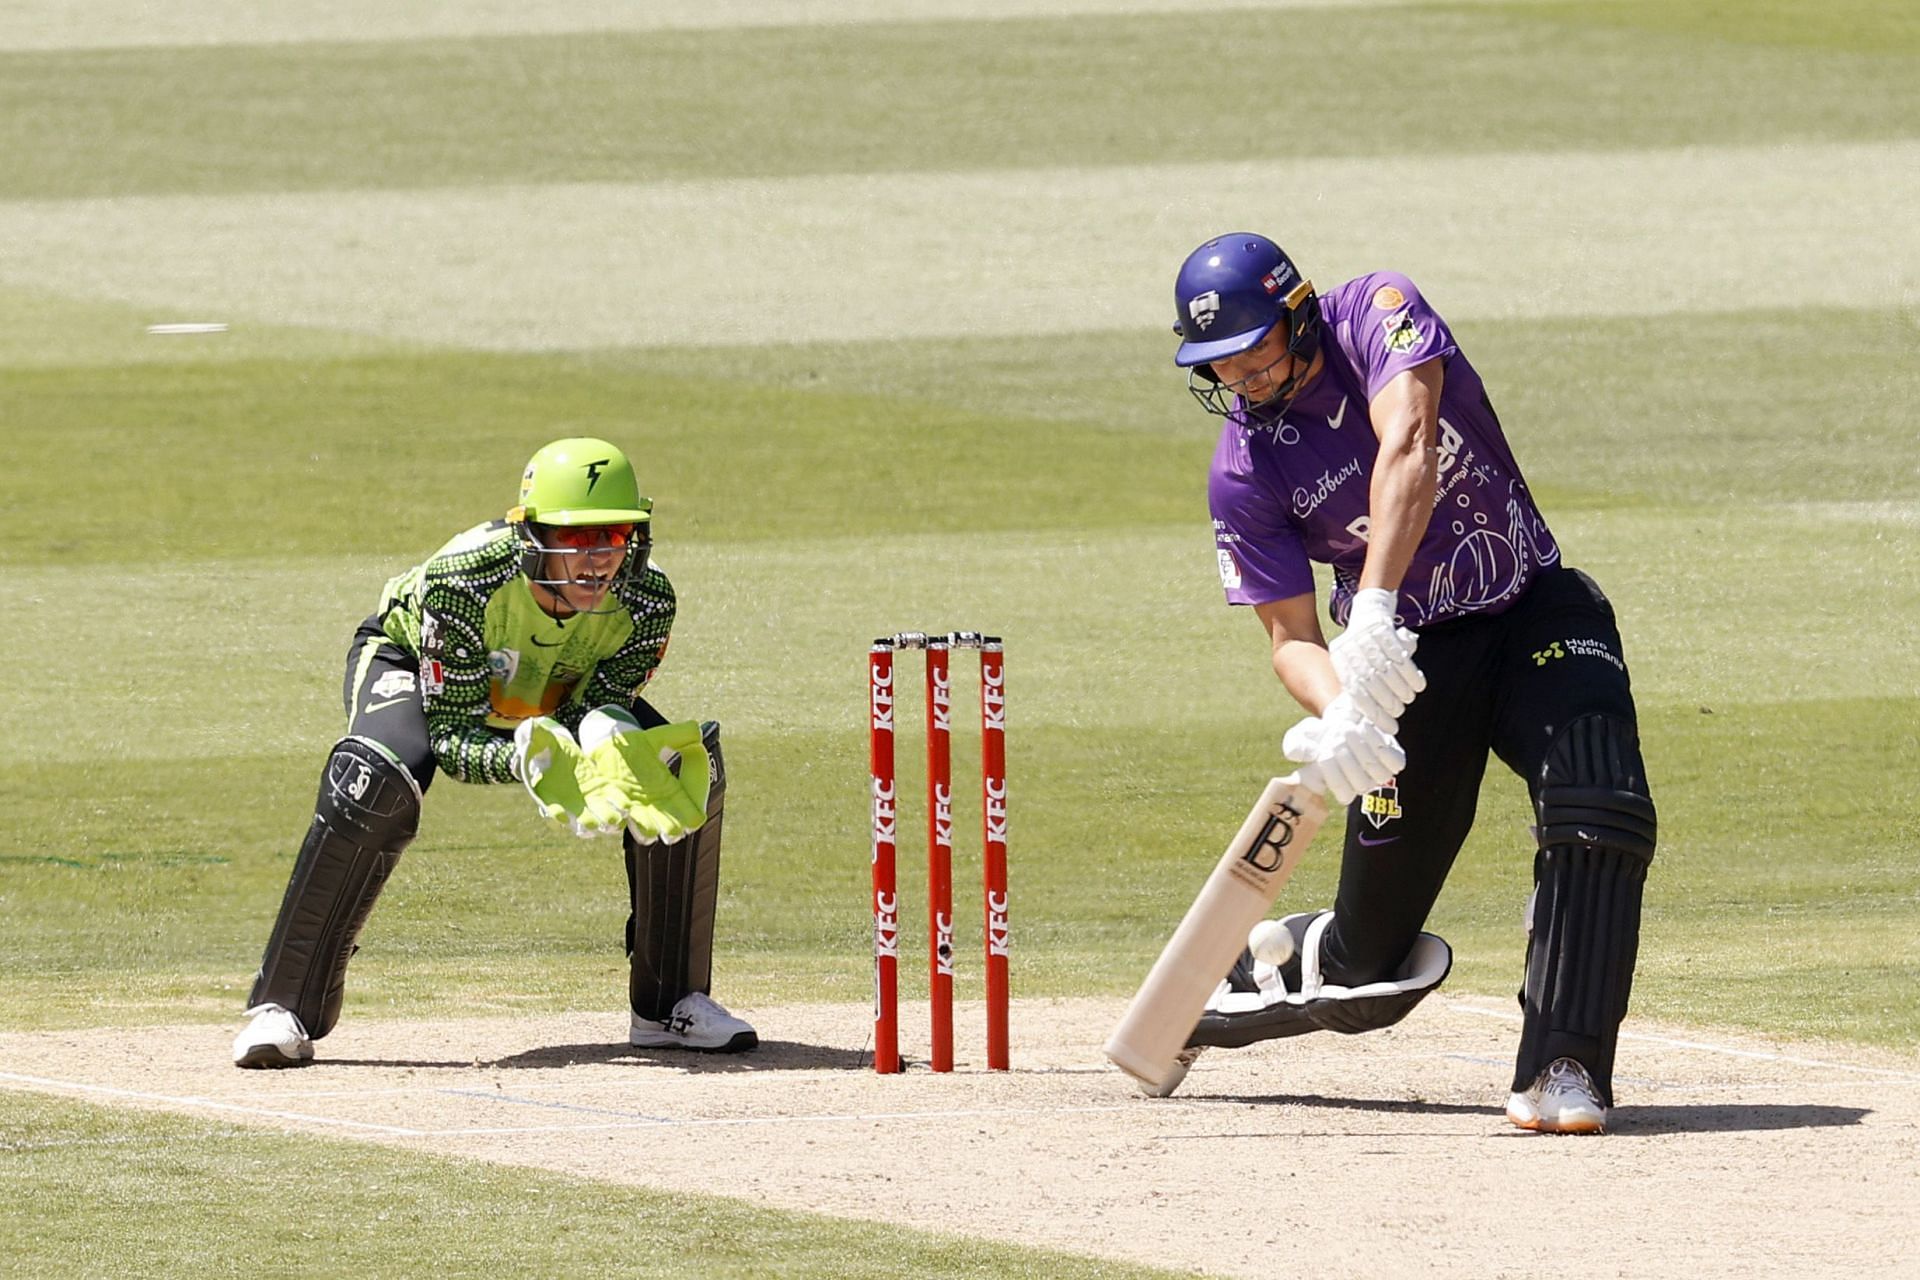 Tim David batting in the BBL. Pic: Getty Images